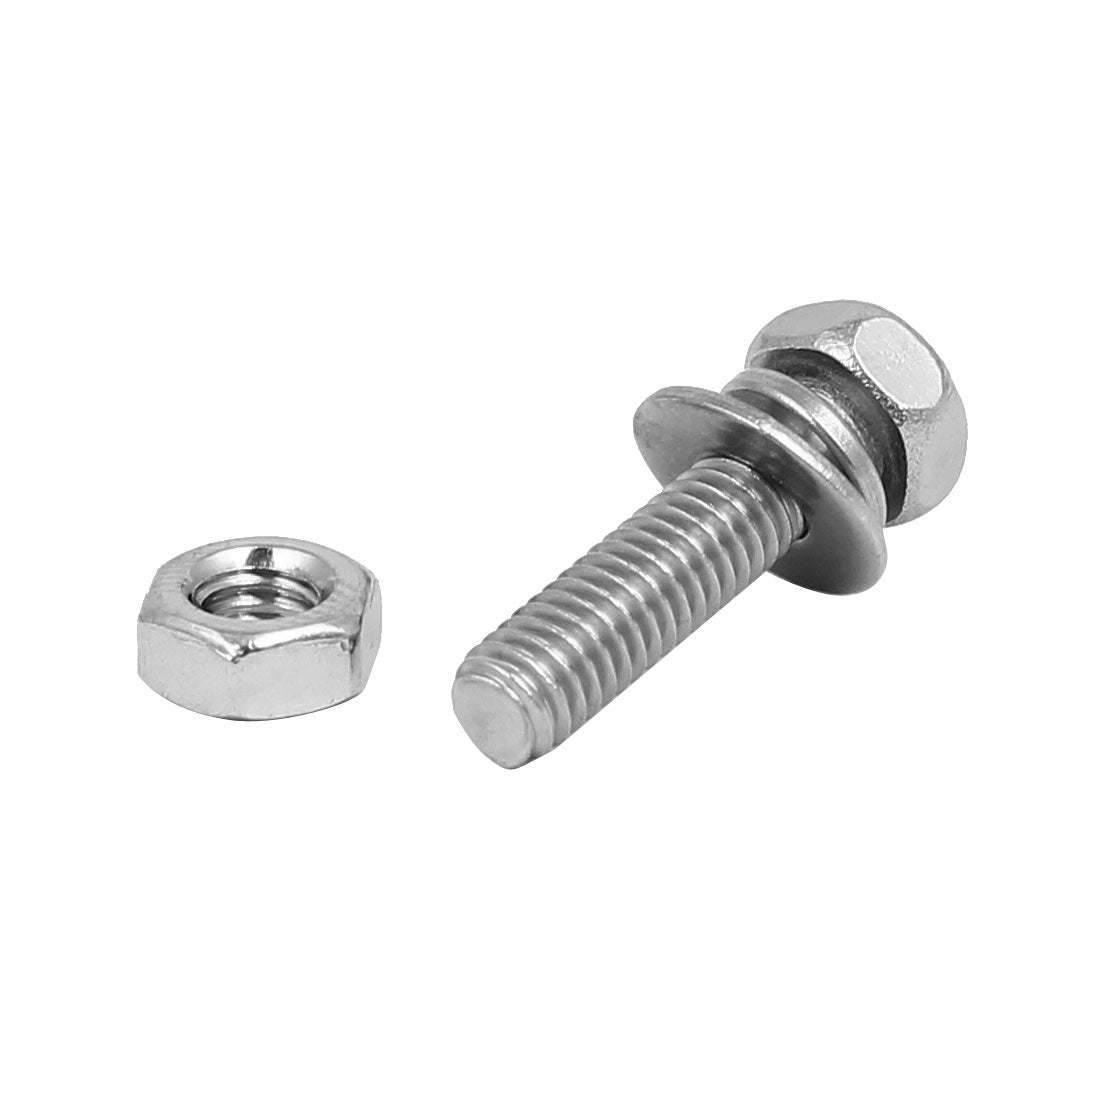 uxcell Uxcell M4 x 16mm 304 Stainless Steel Phillips Hex Head Bolts Nuts w Washers 20 Sets